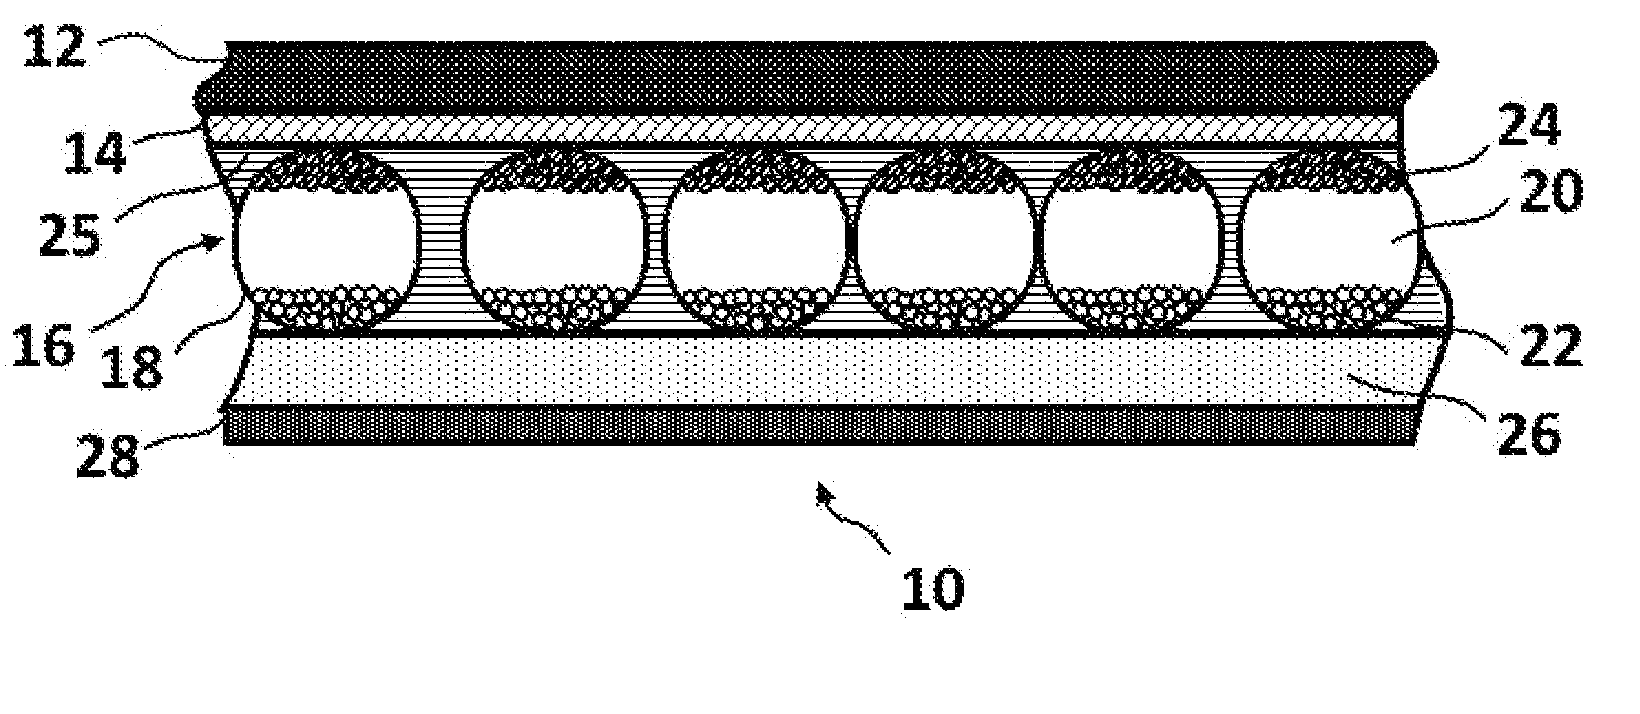 Controlled polymeric material conductivity for use in a two-phase electrode layer